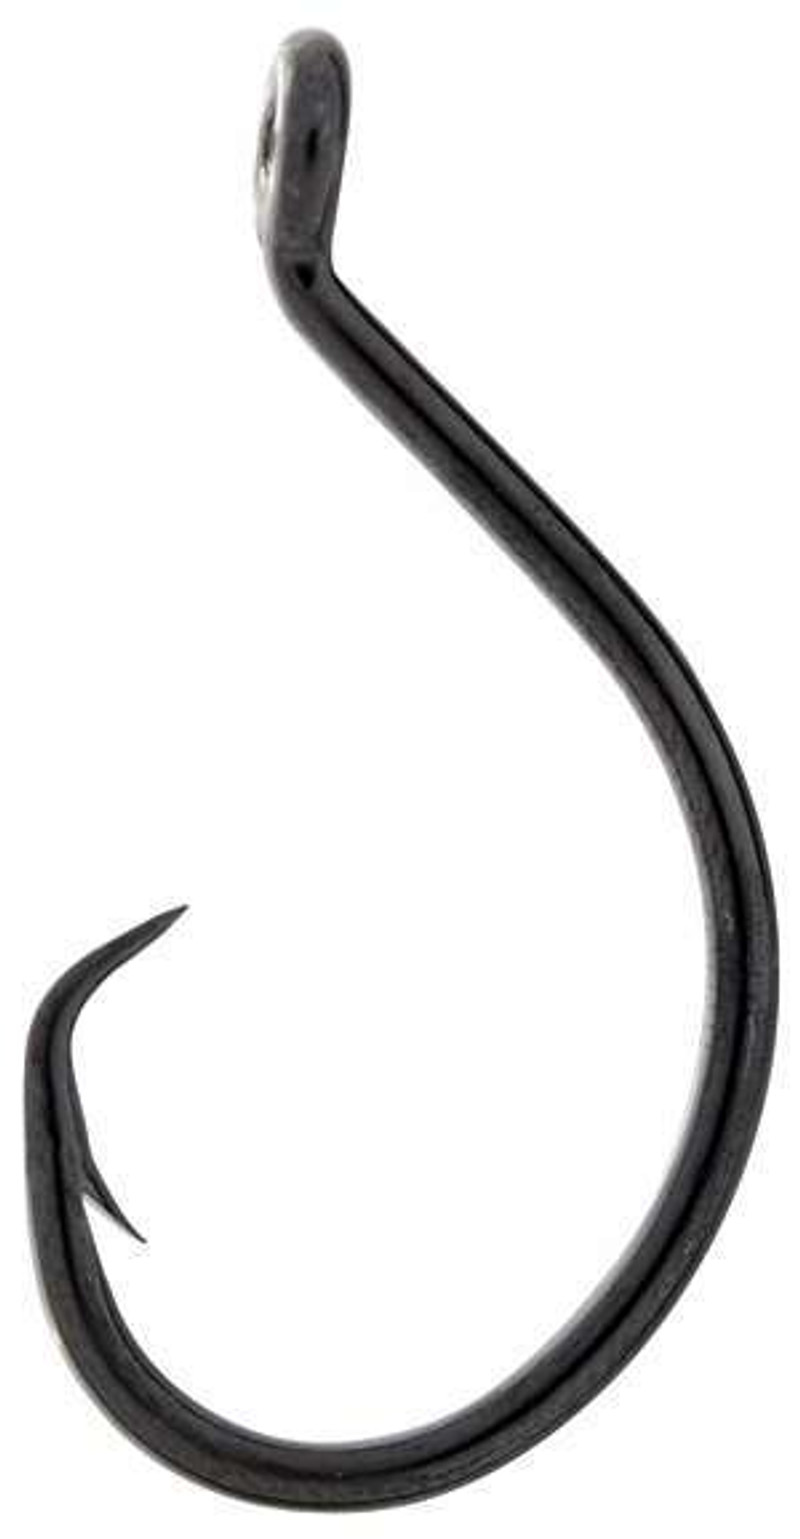 https://cdn11.bigcommerce.com/s-palssl390t/images/stencil/800w/products/50979/79117/mustad-39933np-bn-demon-perfect-circle-2x-strong-hook-mus-0515-4__88222.1696922374.1280.1280.jpg